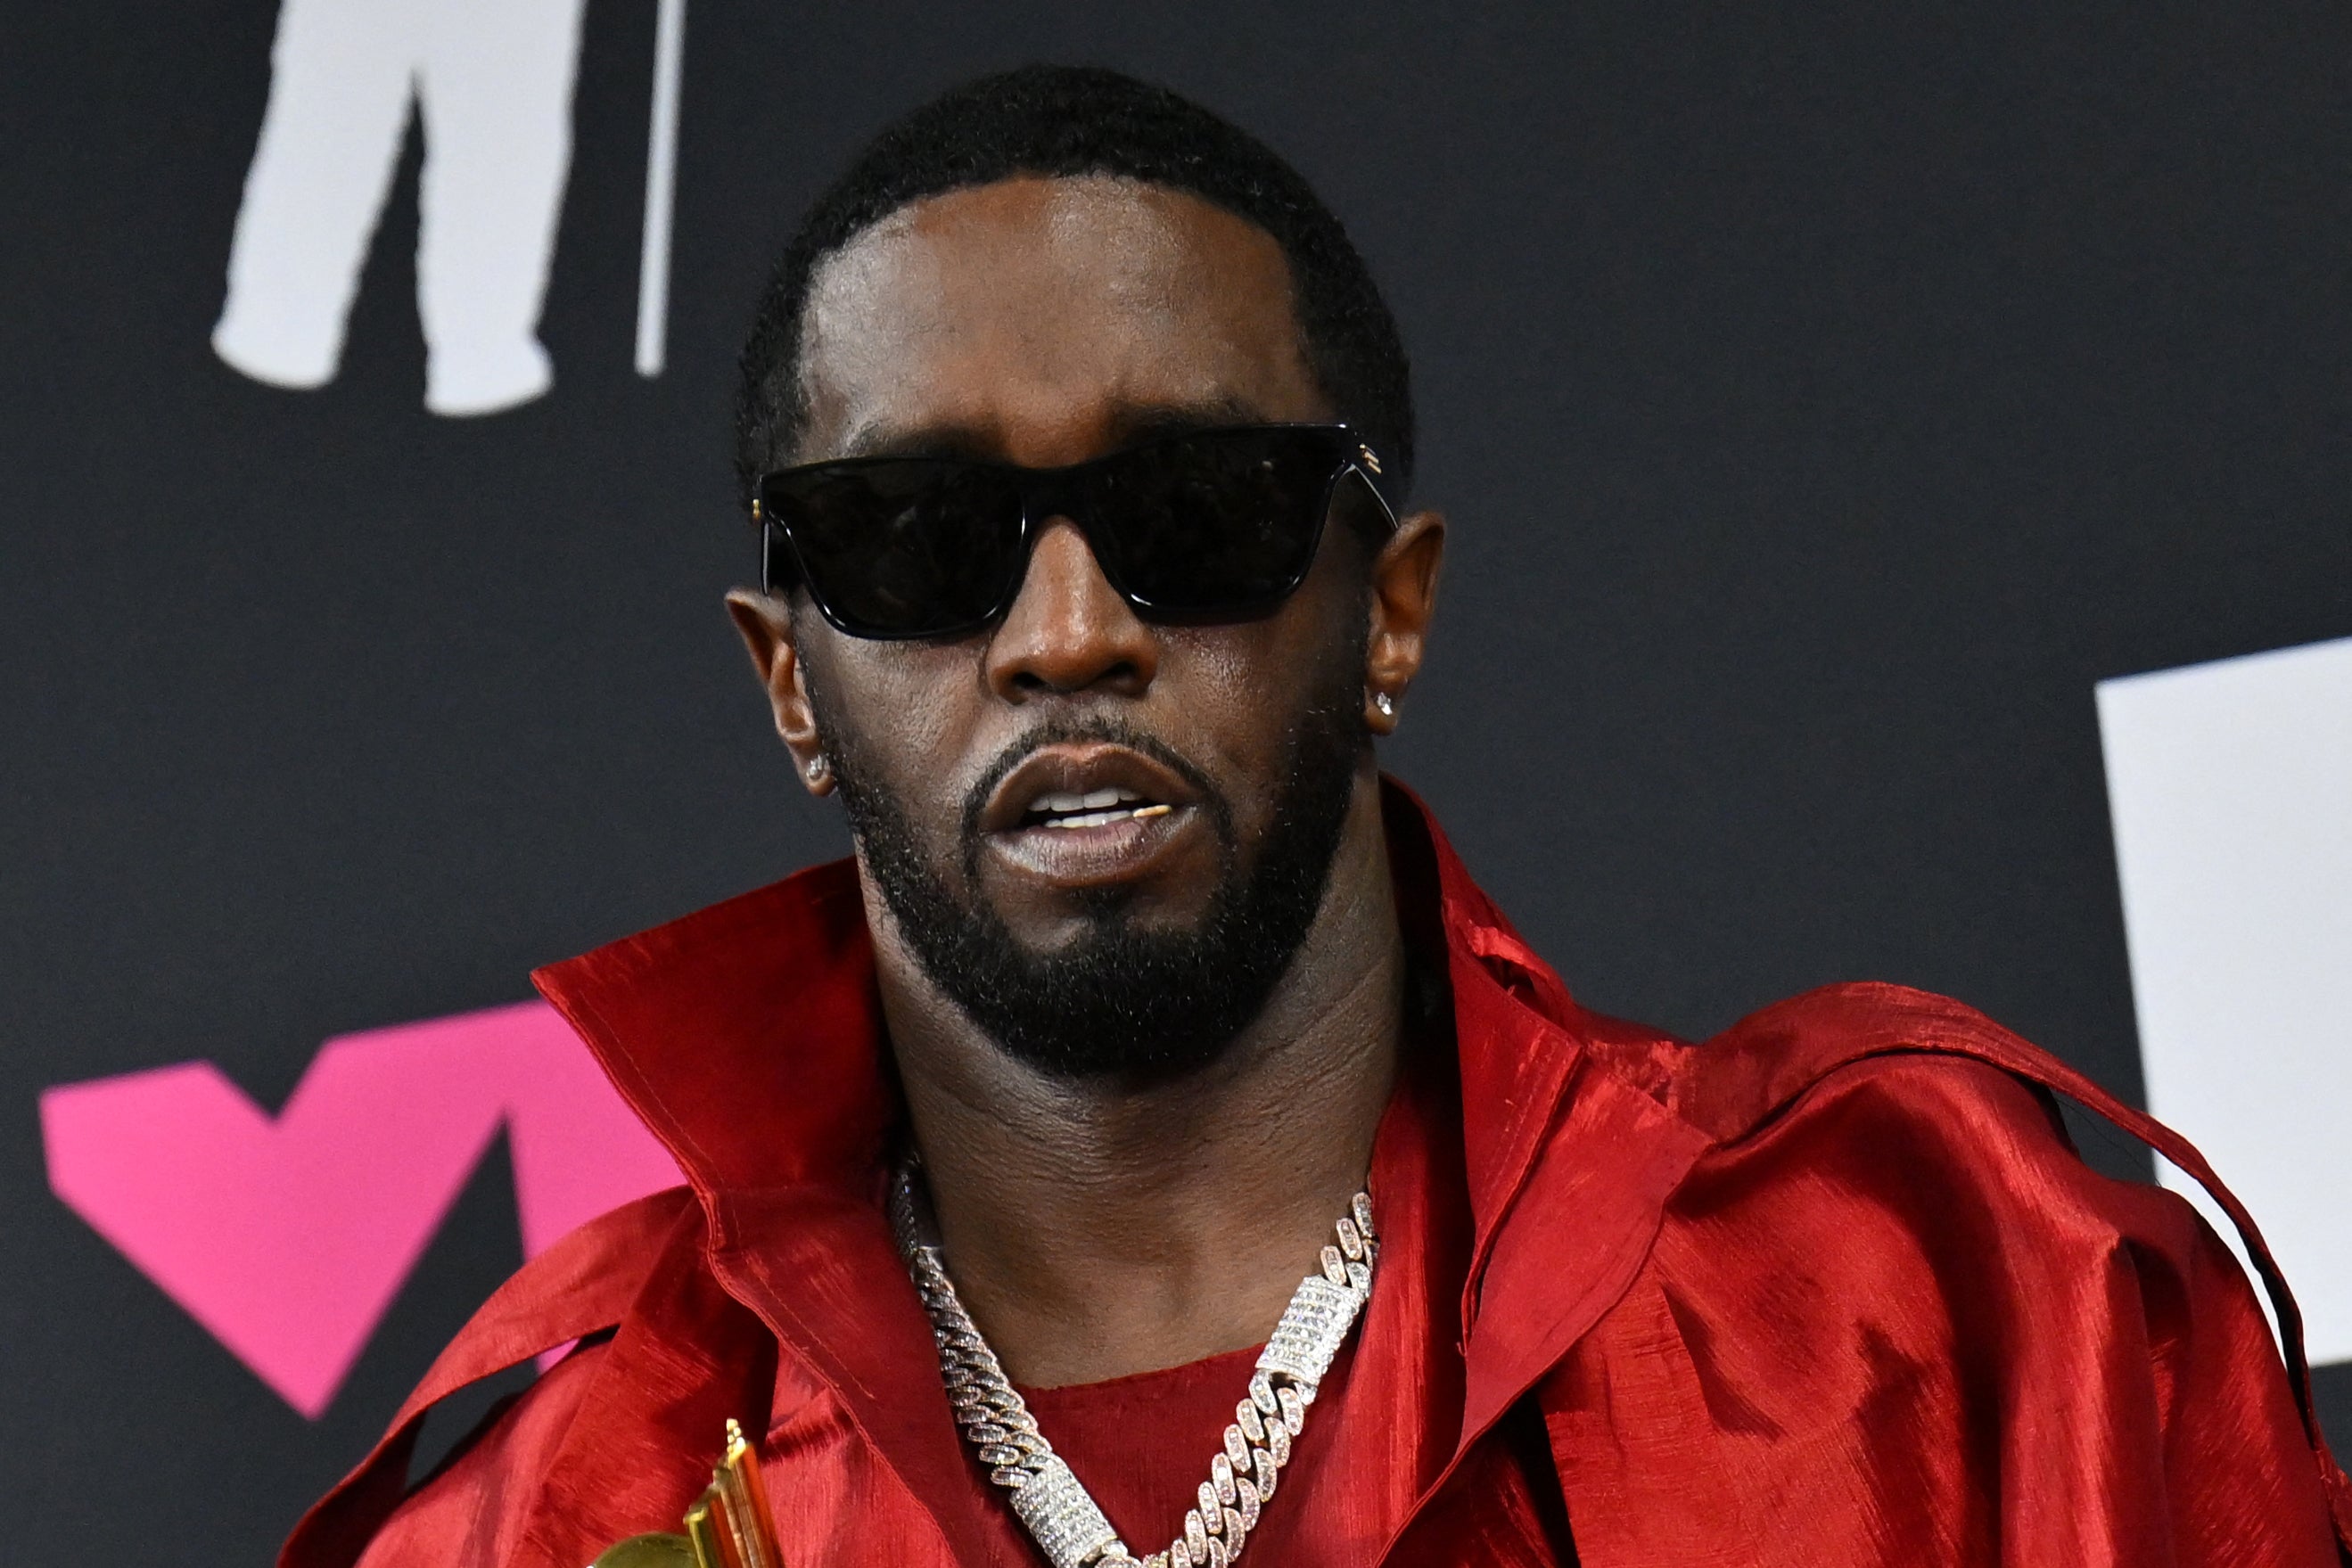 What are the allegations against P Diddy? | The Independent